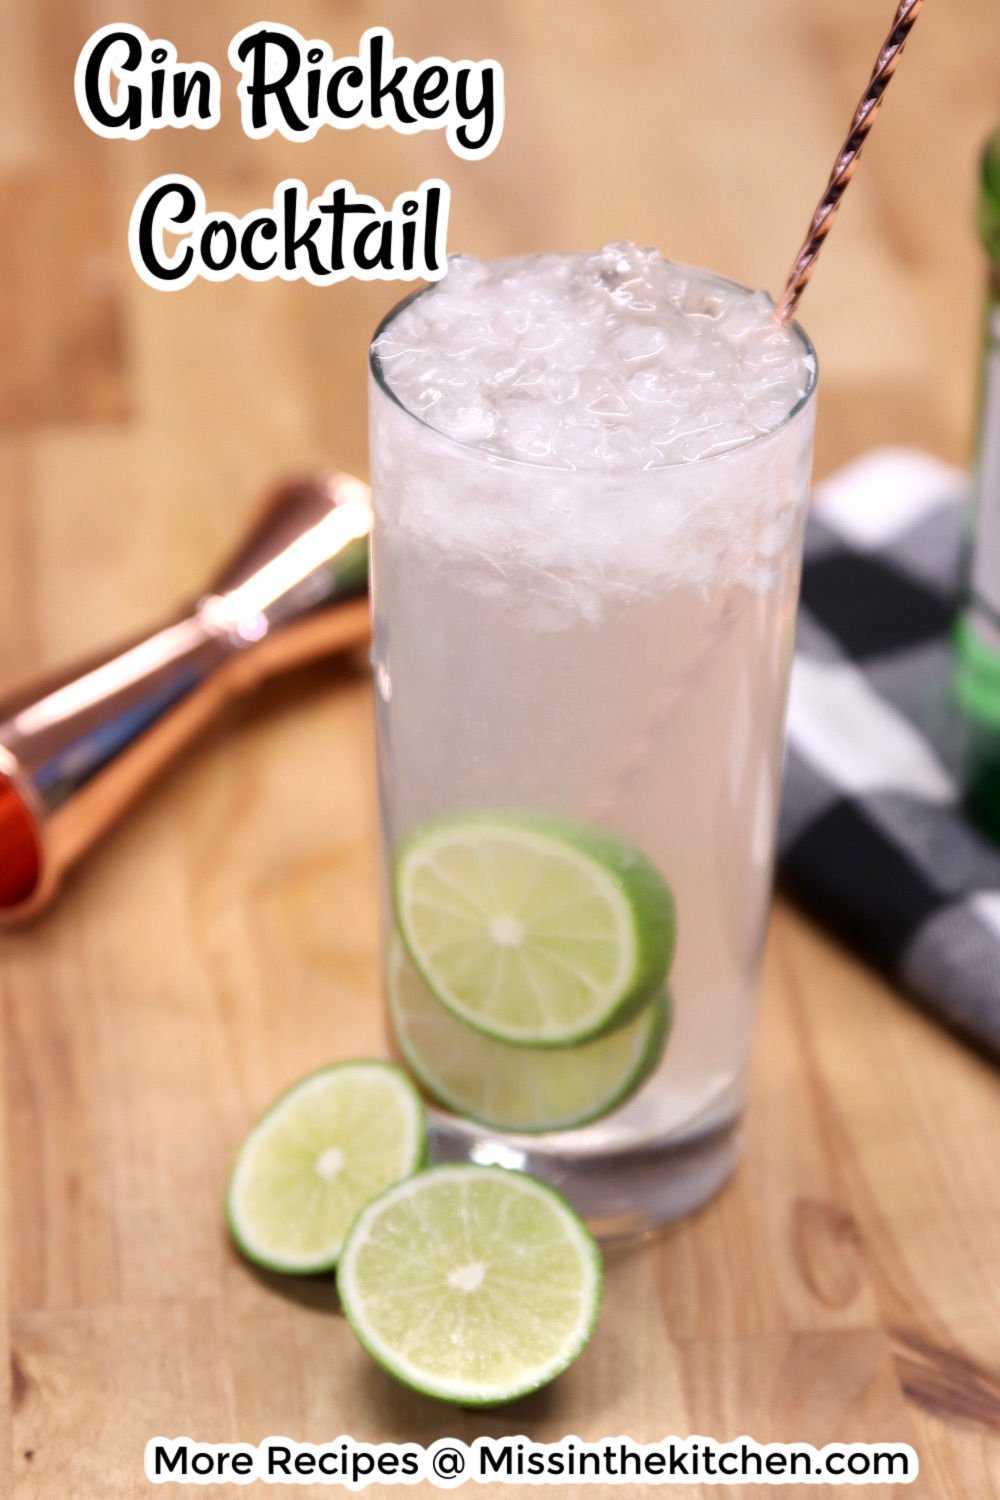 Gin Rickey Cocktail in a collins glass with lime garnish and a cocktail stirring spoon - text overlay